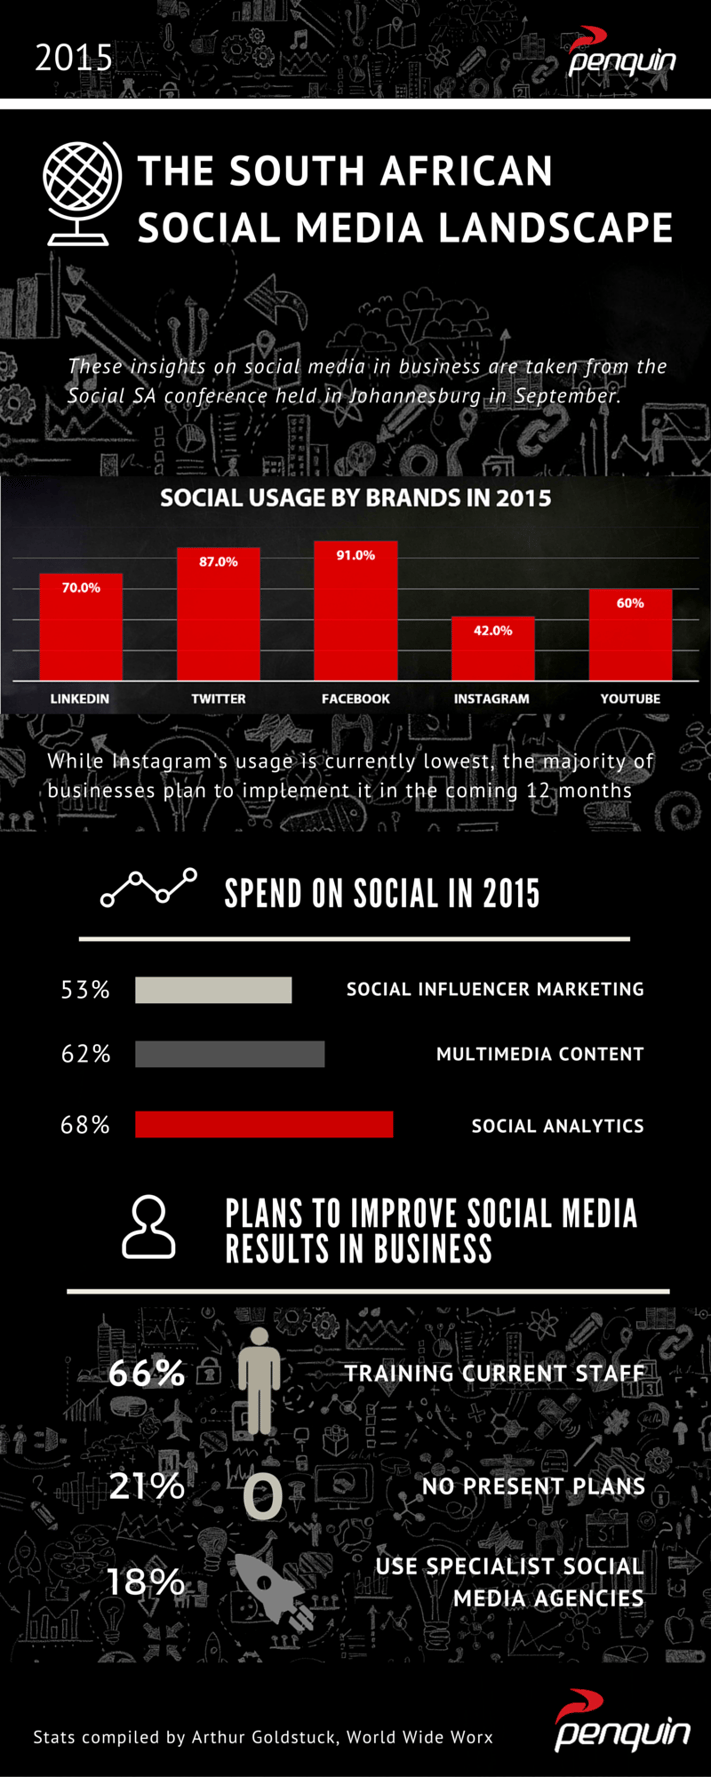 Penquin Infographic South African Social Media Landscape in Business 2015